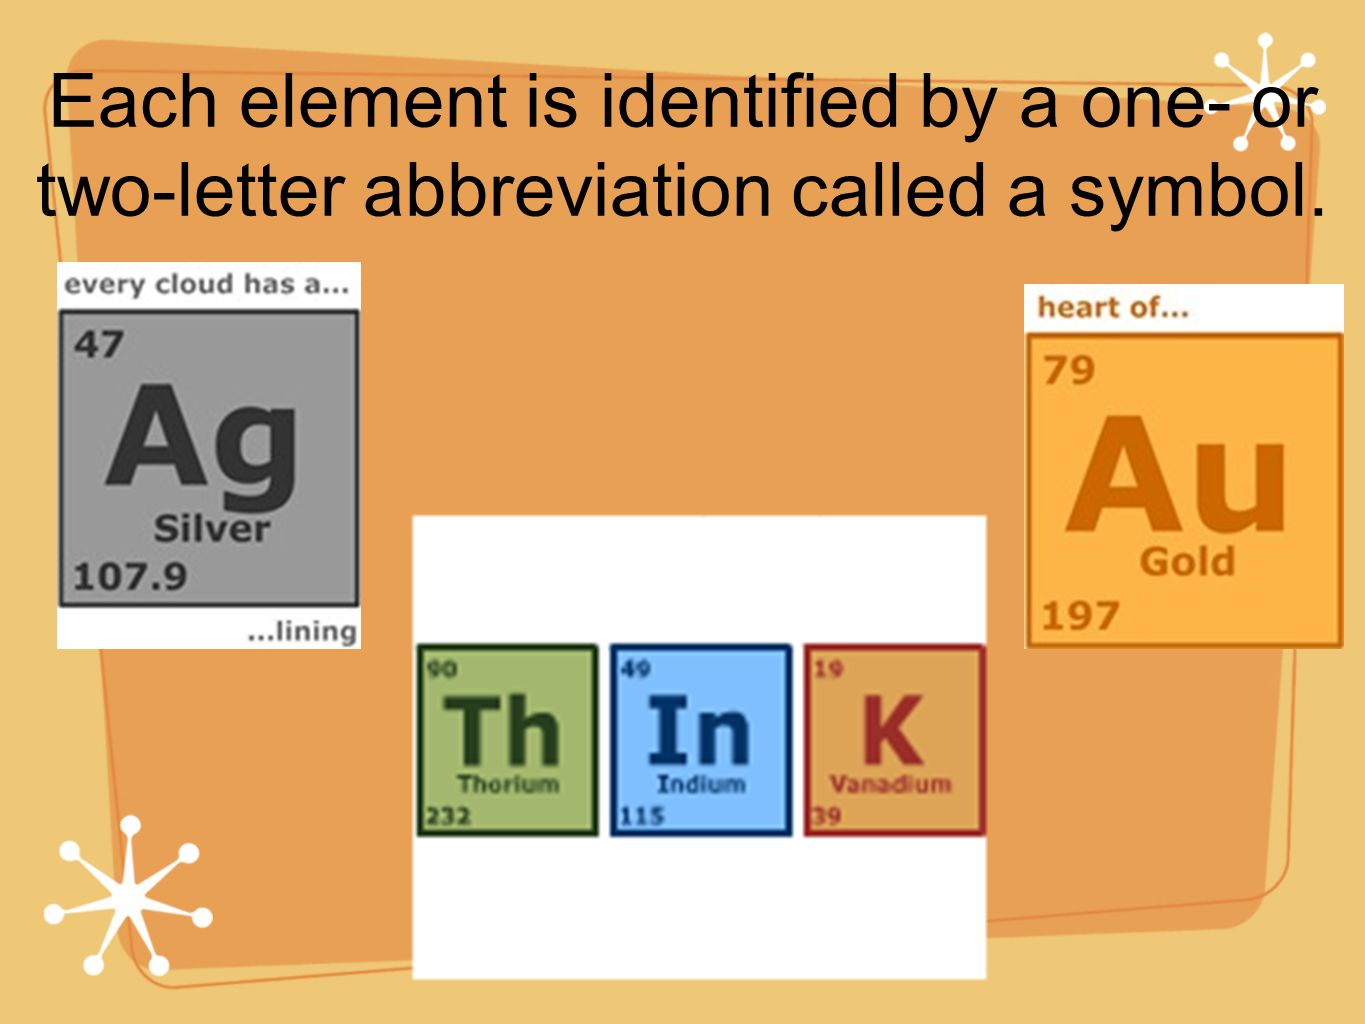 Each element is identified by a one- or two-letter abbreviation called a symbol.